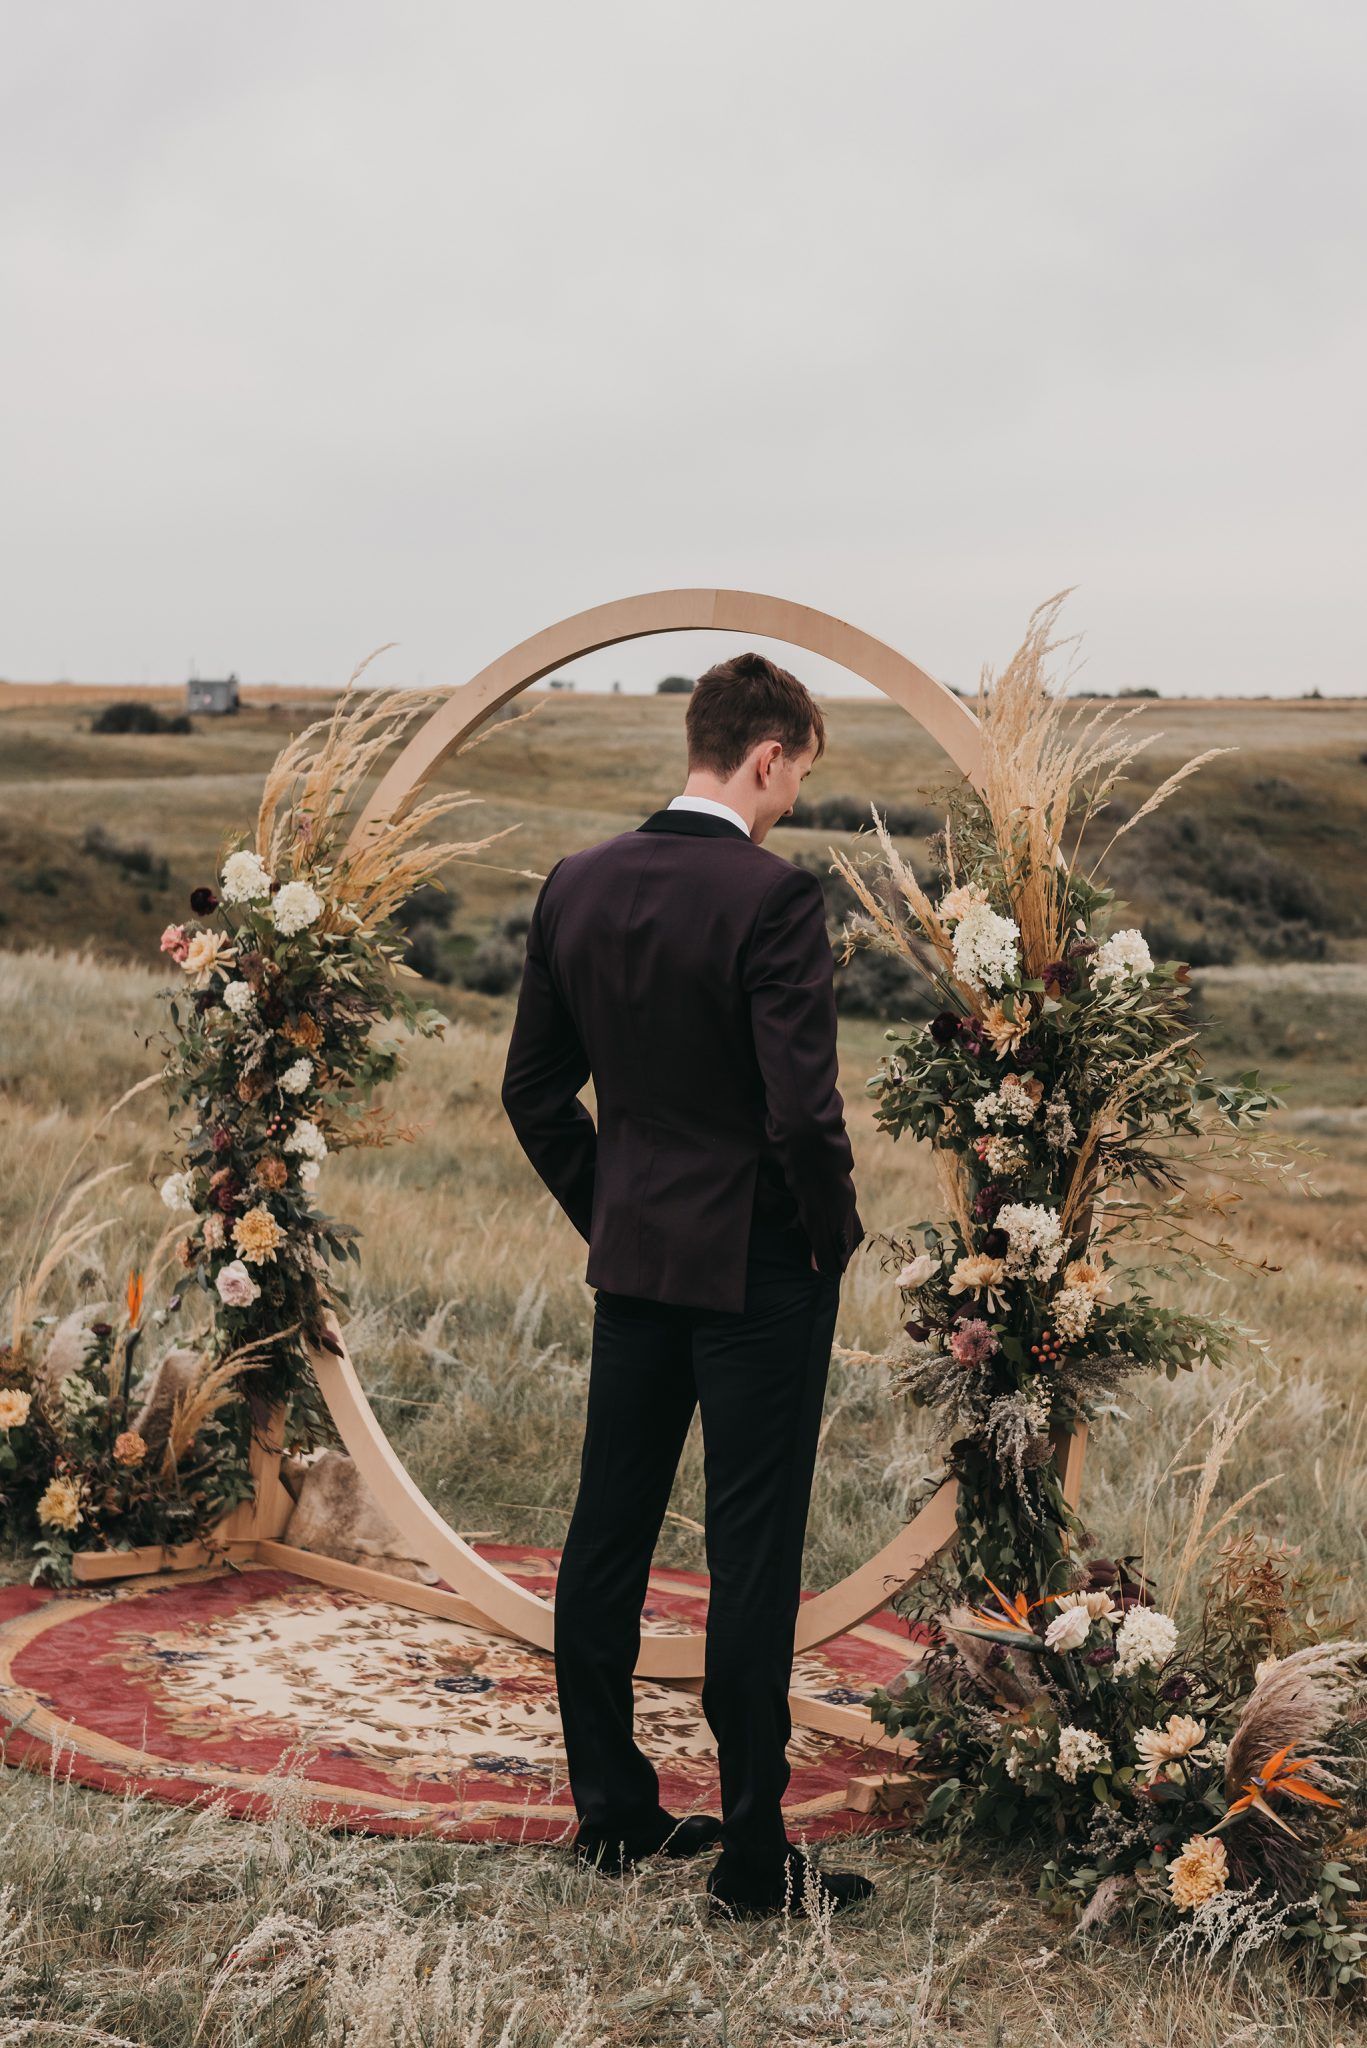 Real Wedding - Countryside Nuptials & Moroccan Styled Reception - featured on Junebug and Bronte Bride, boho wedding, plum suit